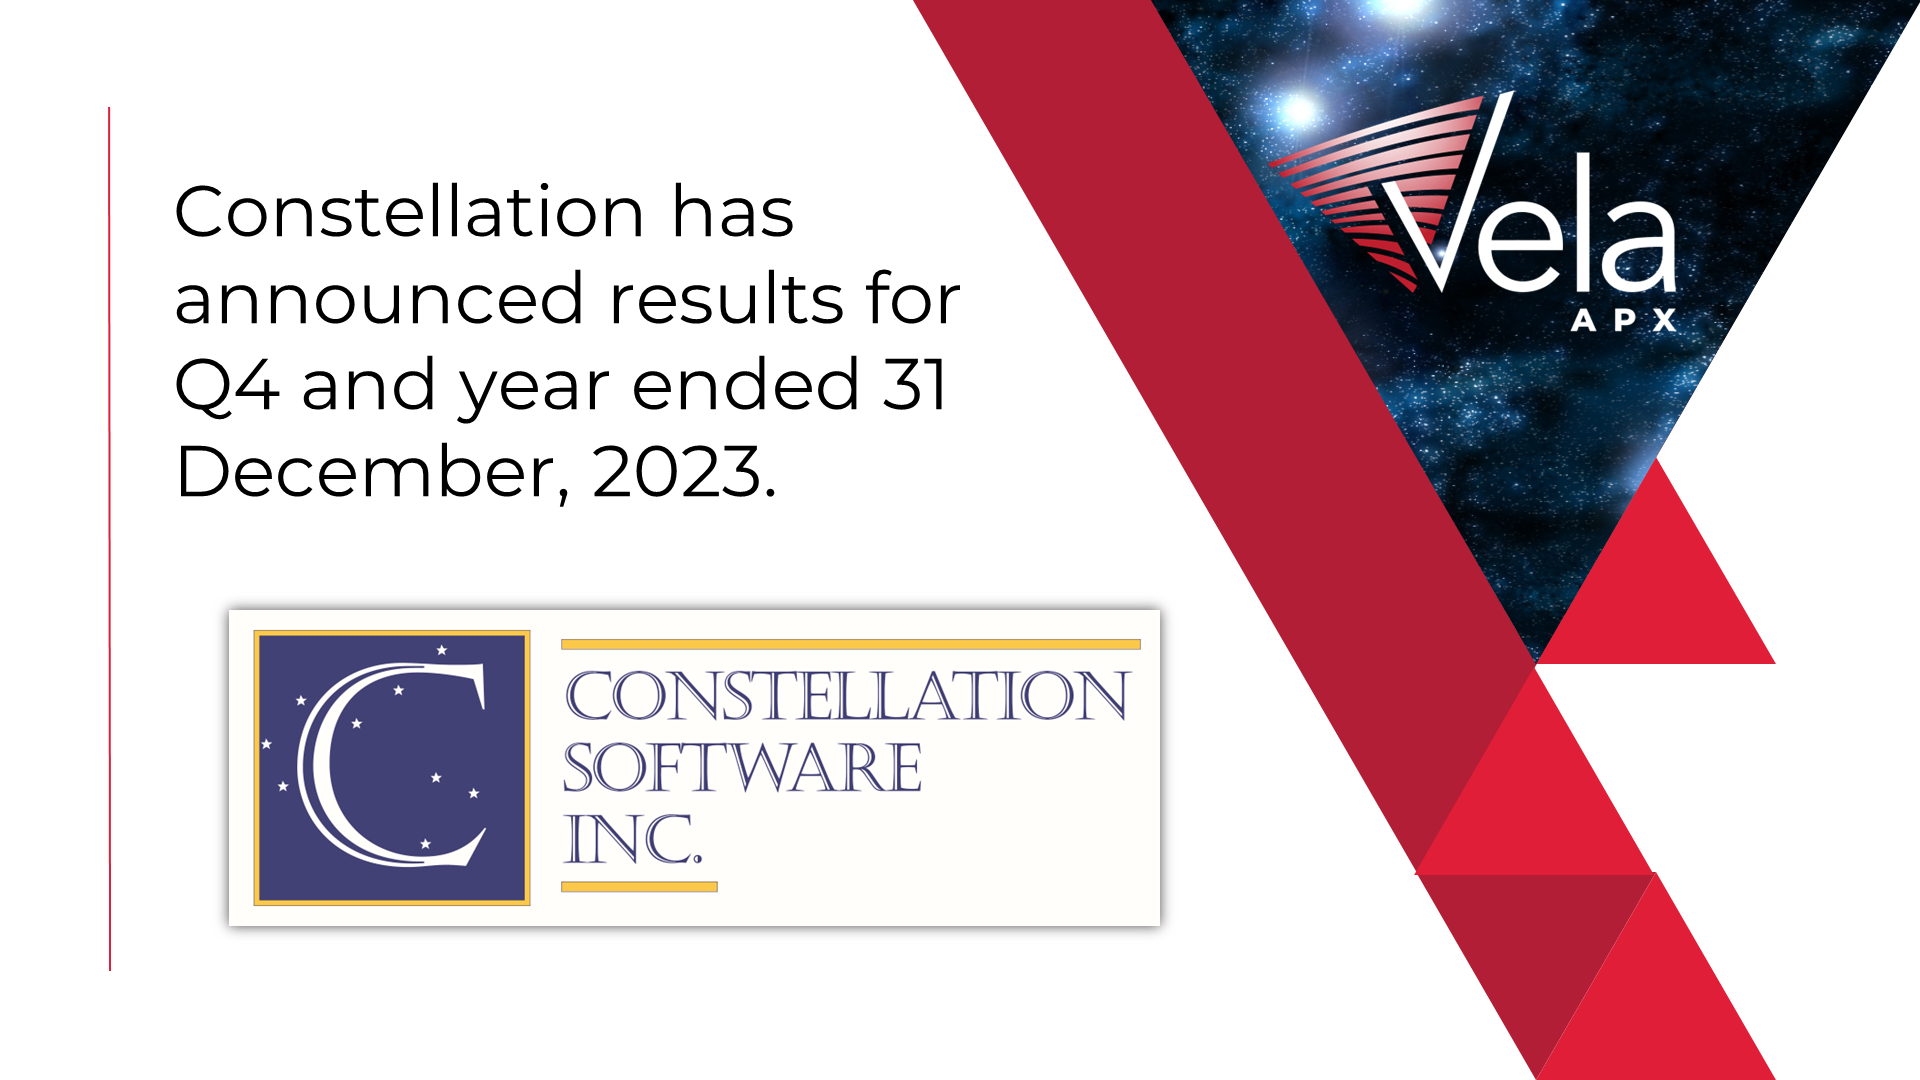 Announcement of 2023 earnings results for Constellation Software Inc